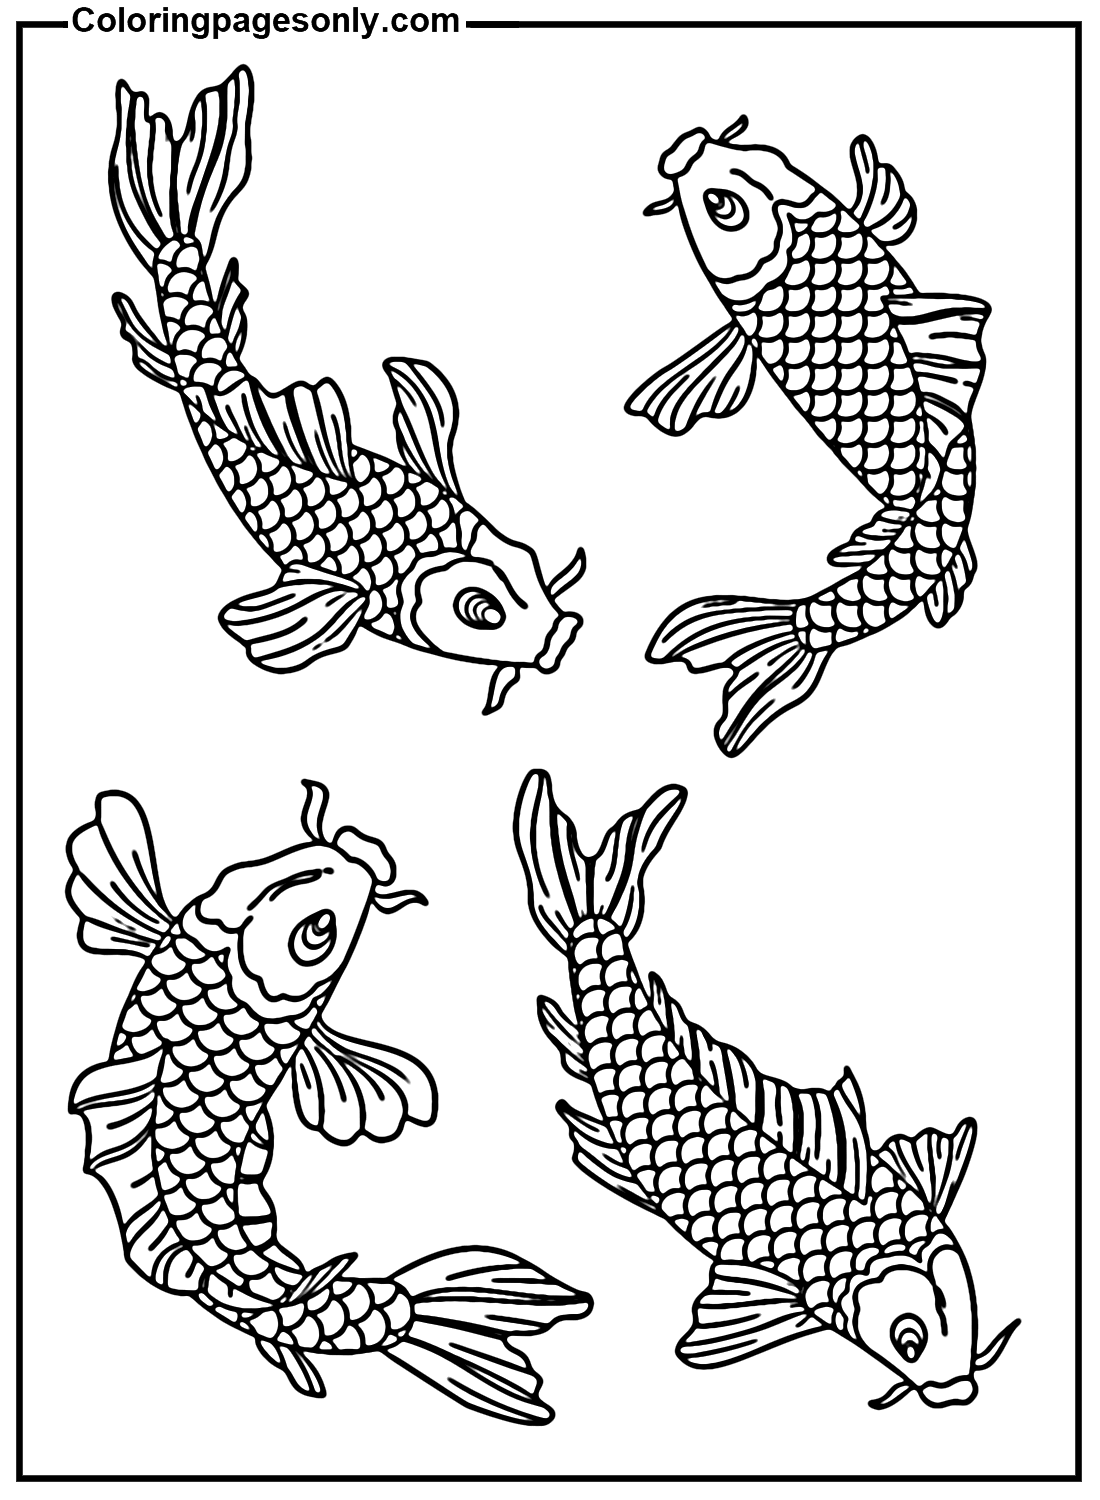 Koi Fish in a Tank Coloring Page